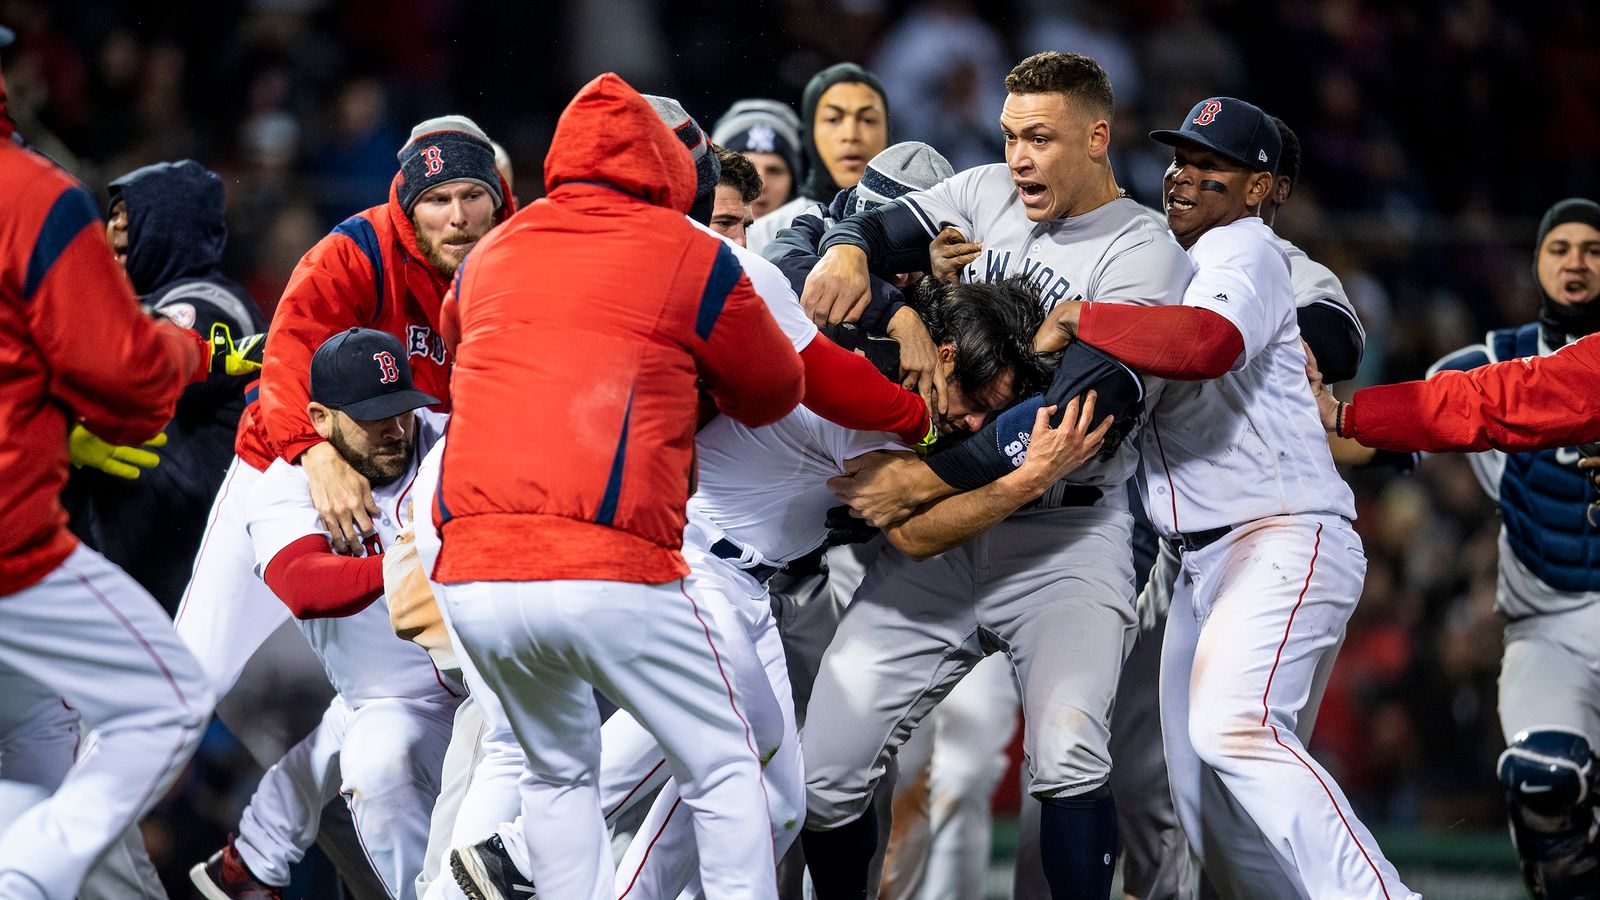 The 2019 National League East Preview and Prediction